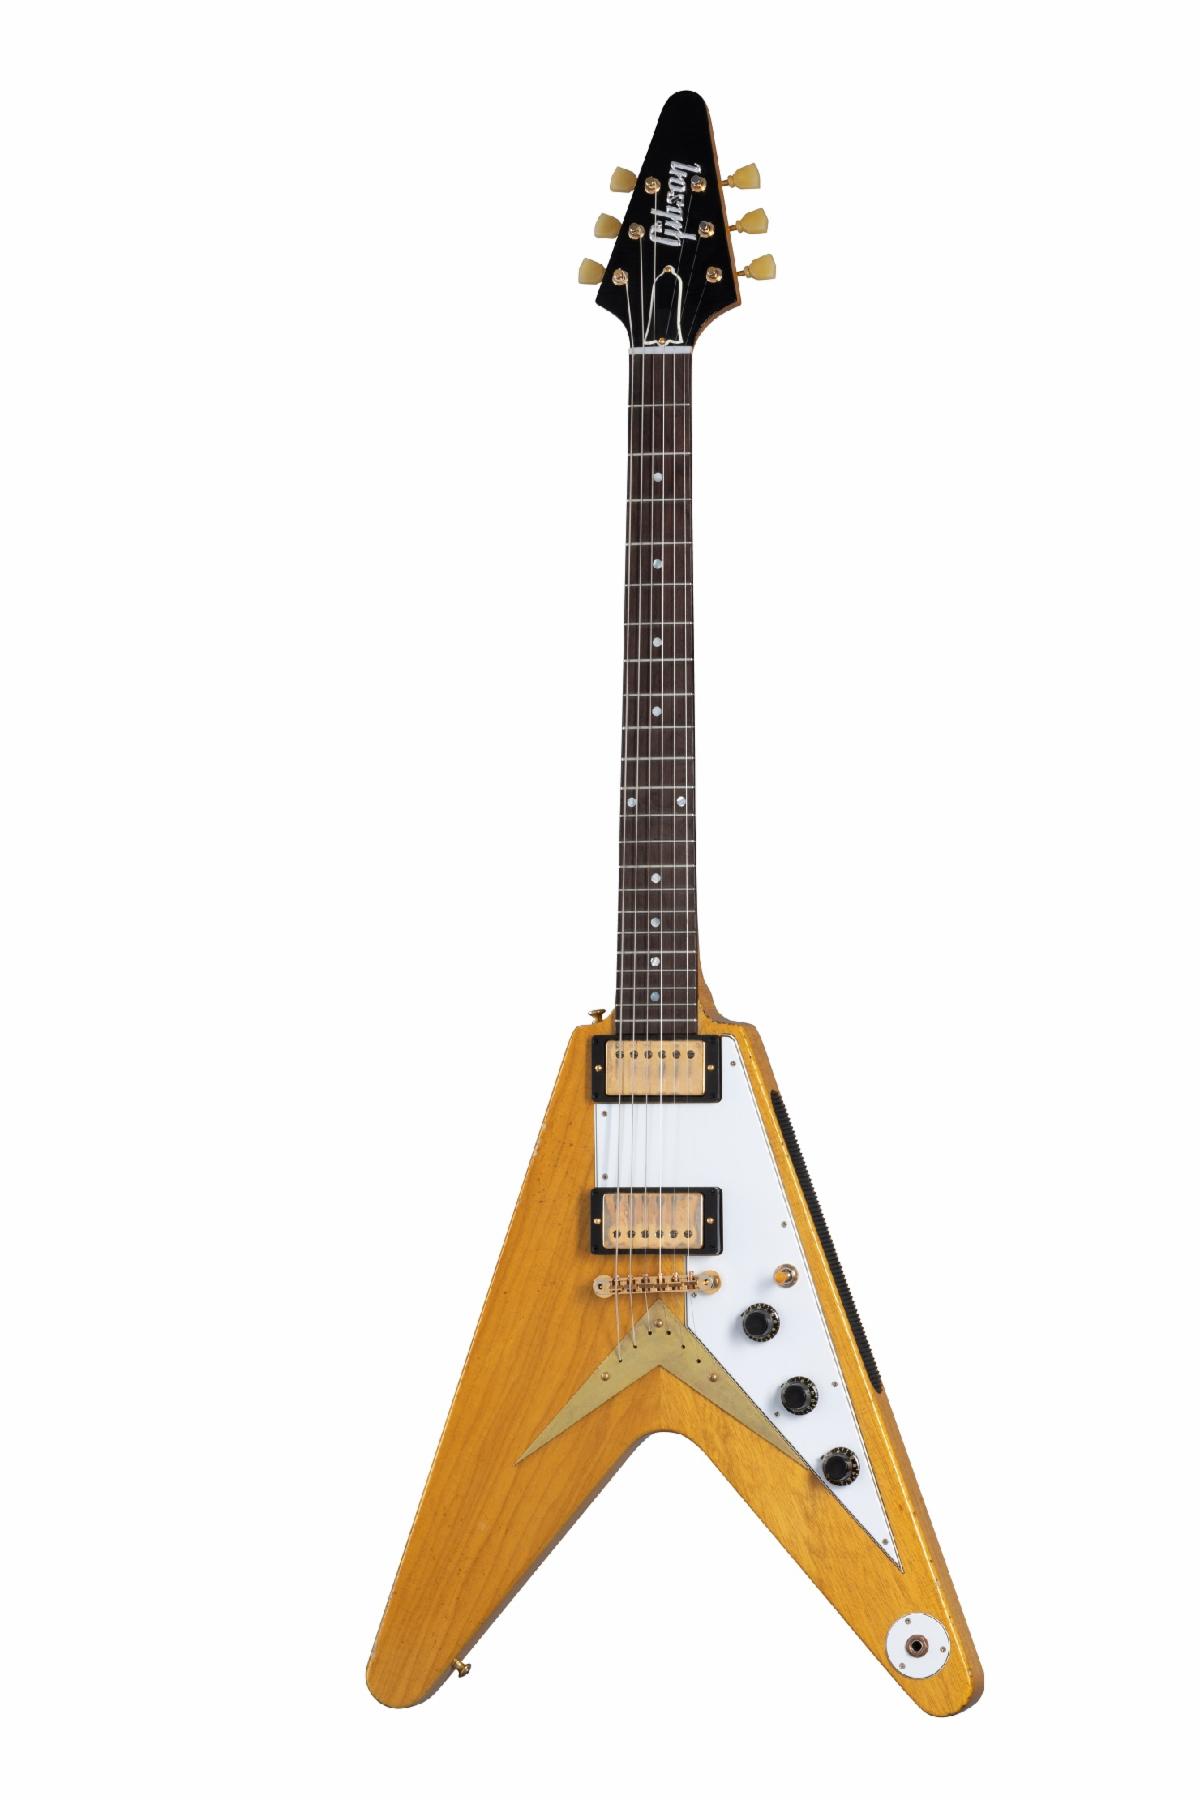 The Collector’s Edition 1958 Flying V.